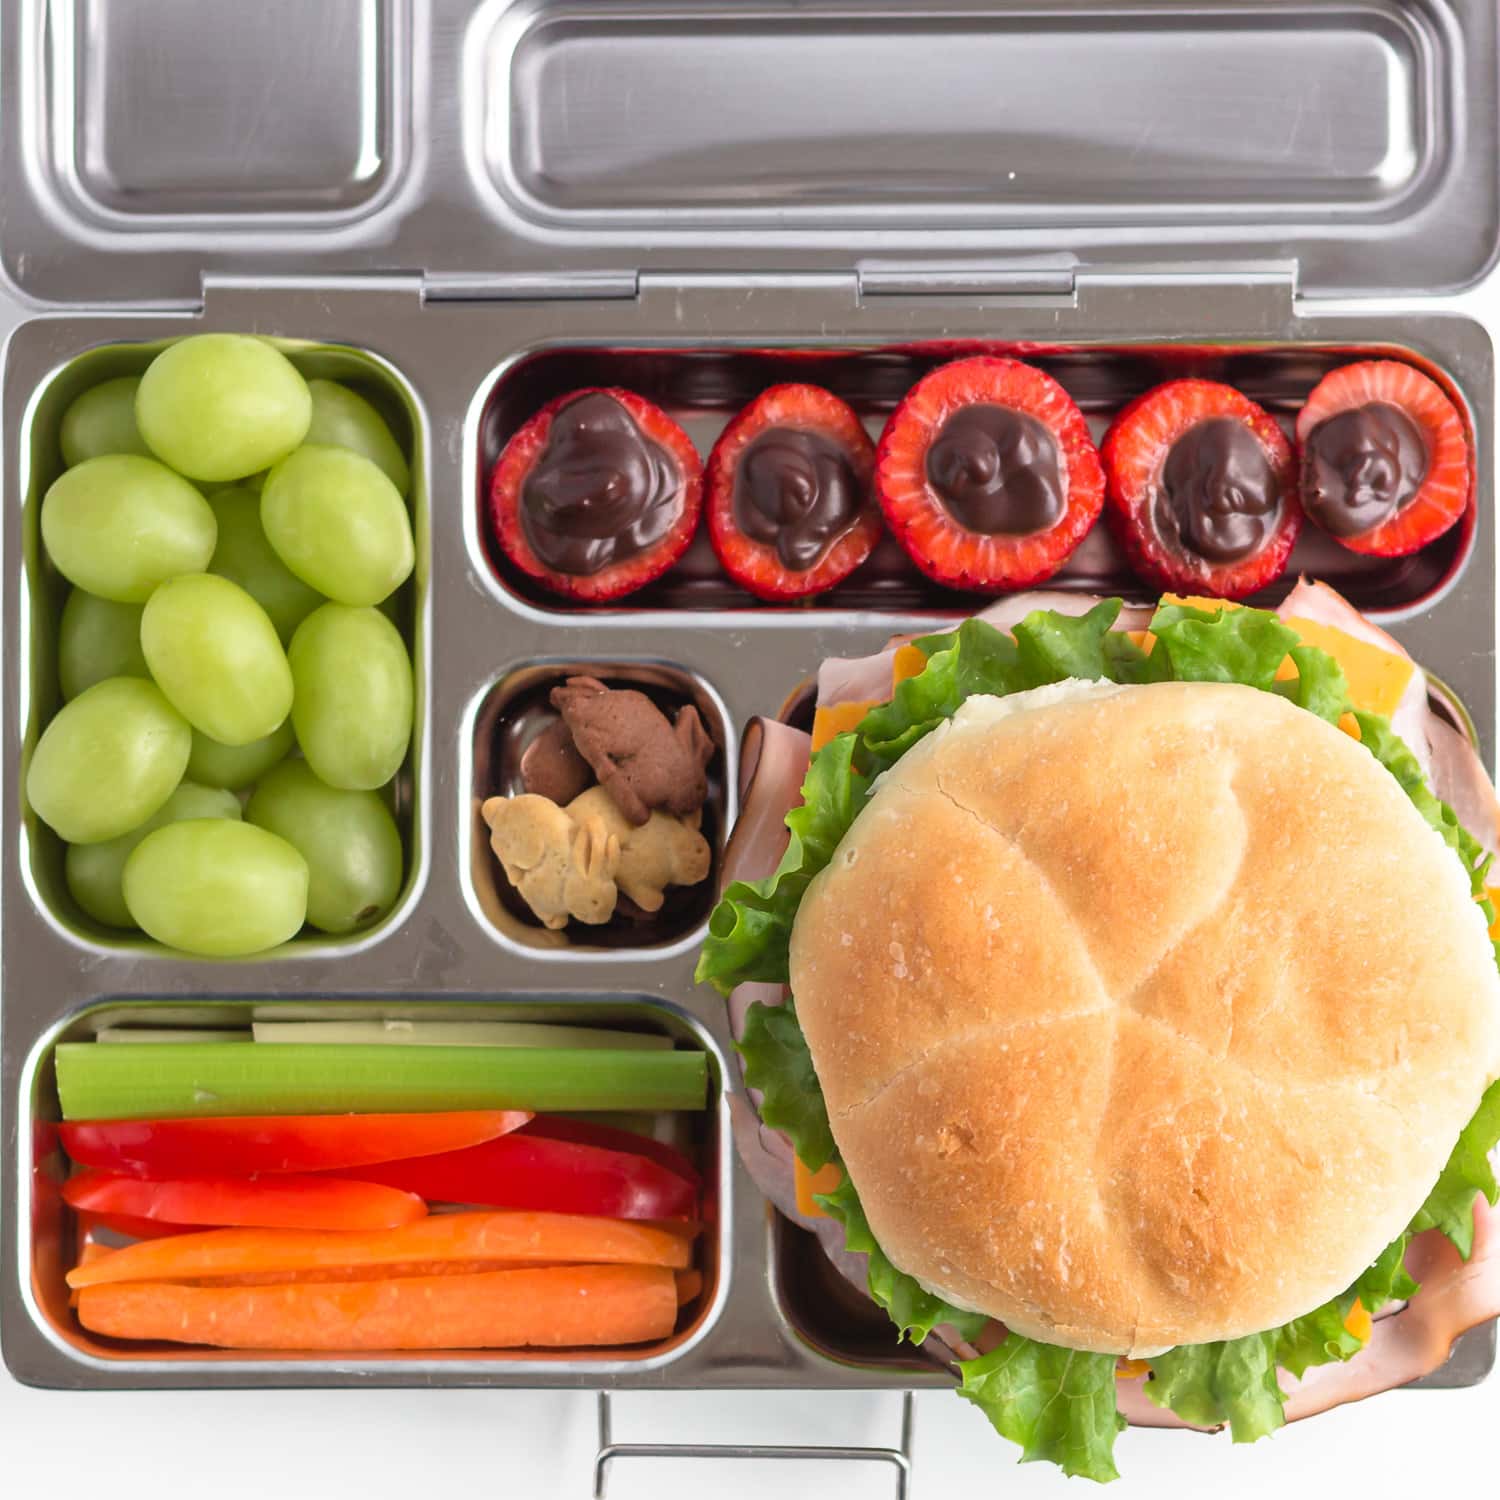 Stainless steel bento-style lunch box filled with a bun sandwich, grapes, veggie sticks, chocolate filled strawberries and small bunny cookies.